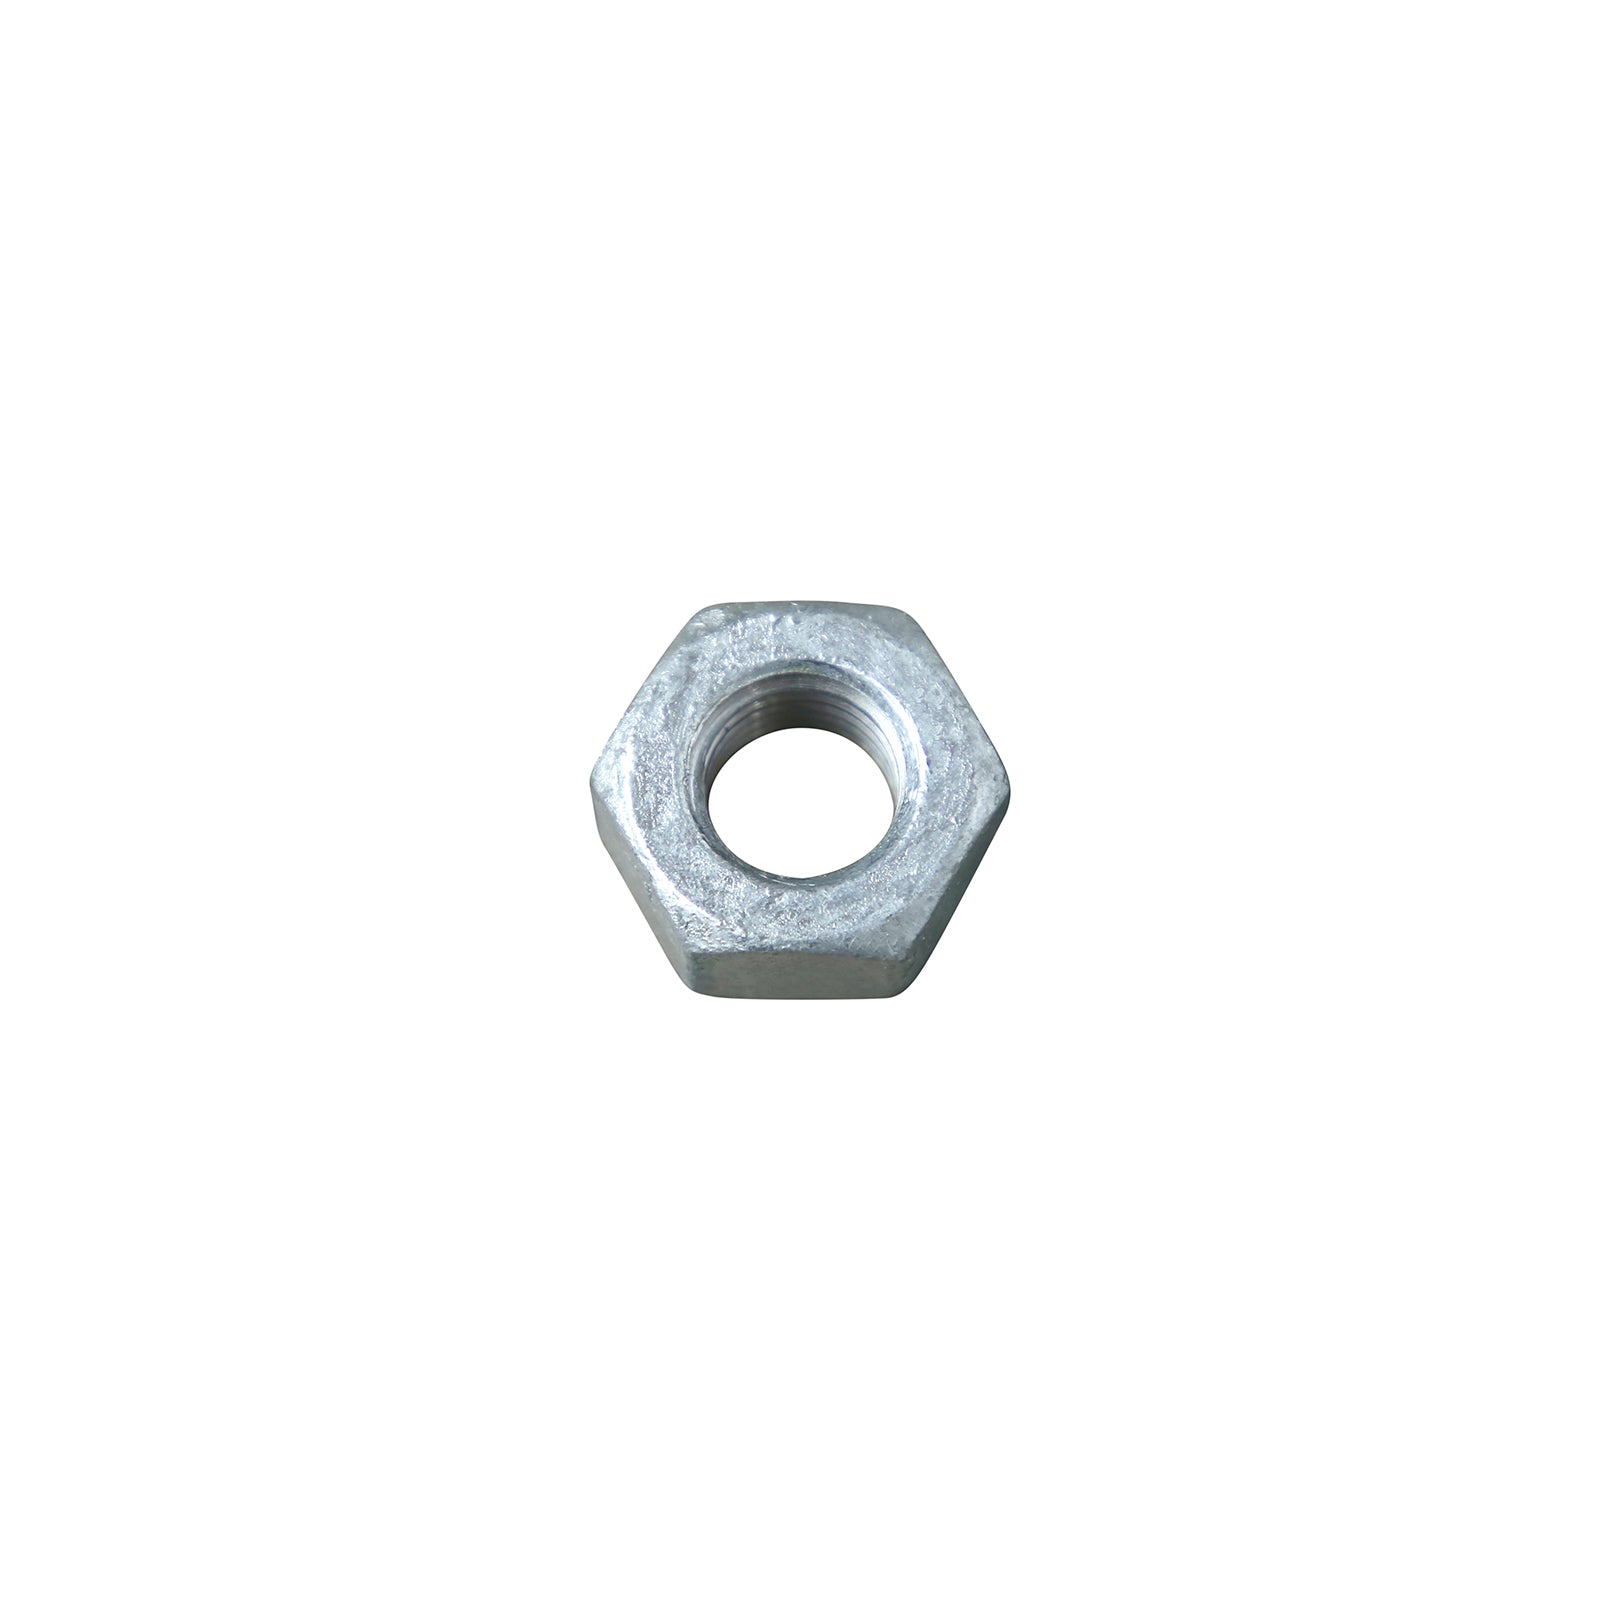 1/2-13 A563 Heavy Hex Nuts, Plain